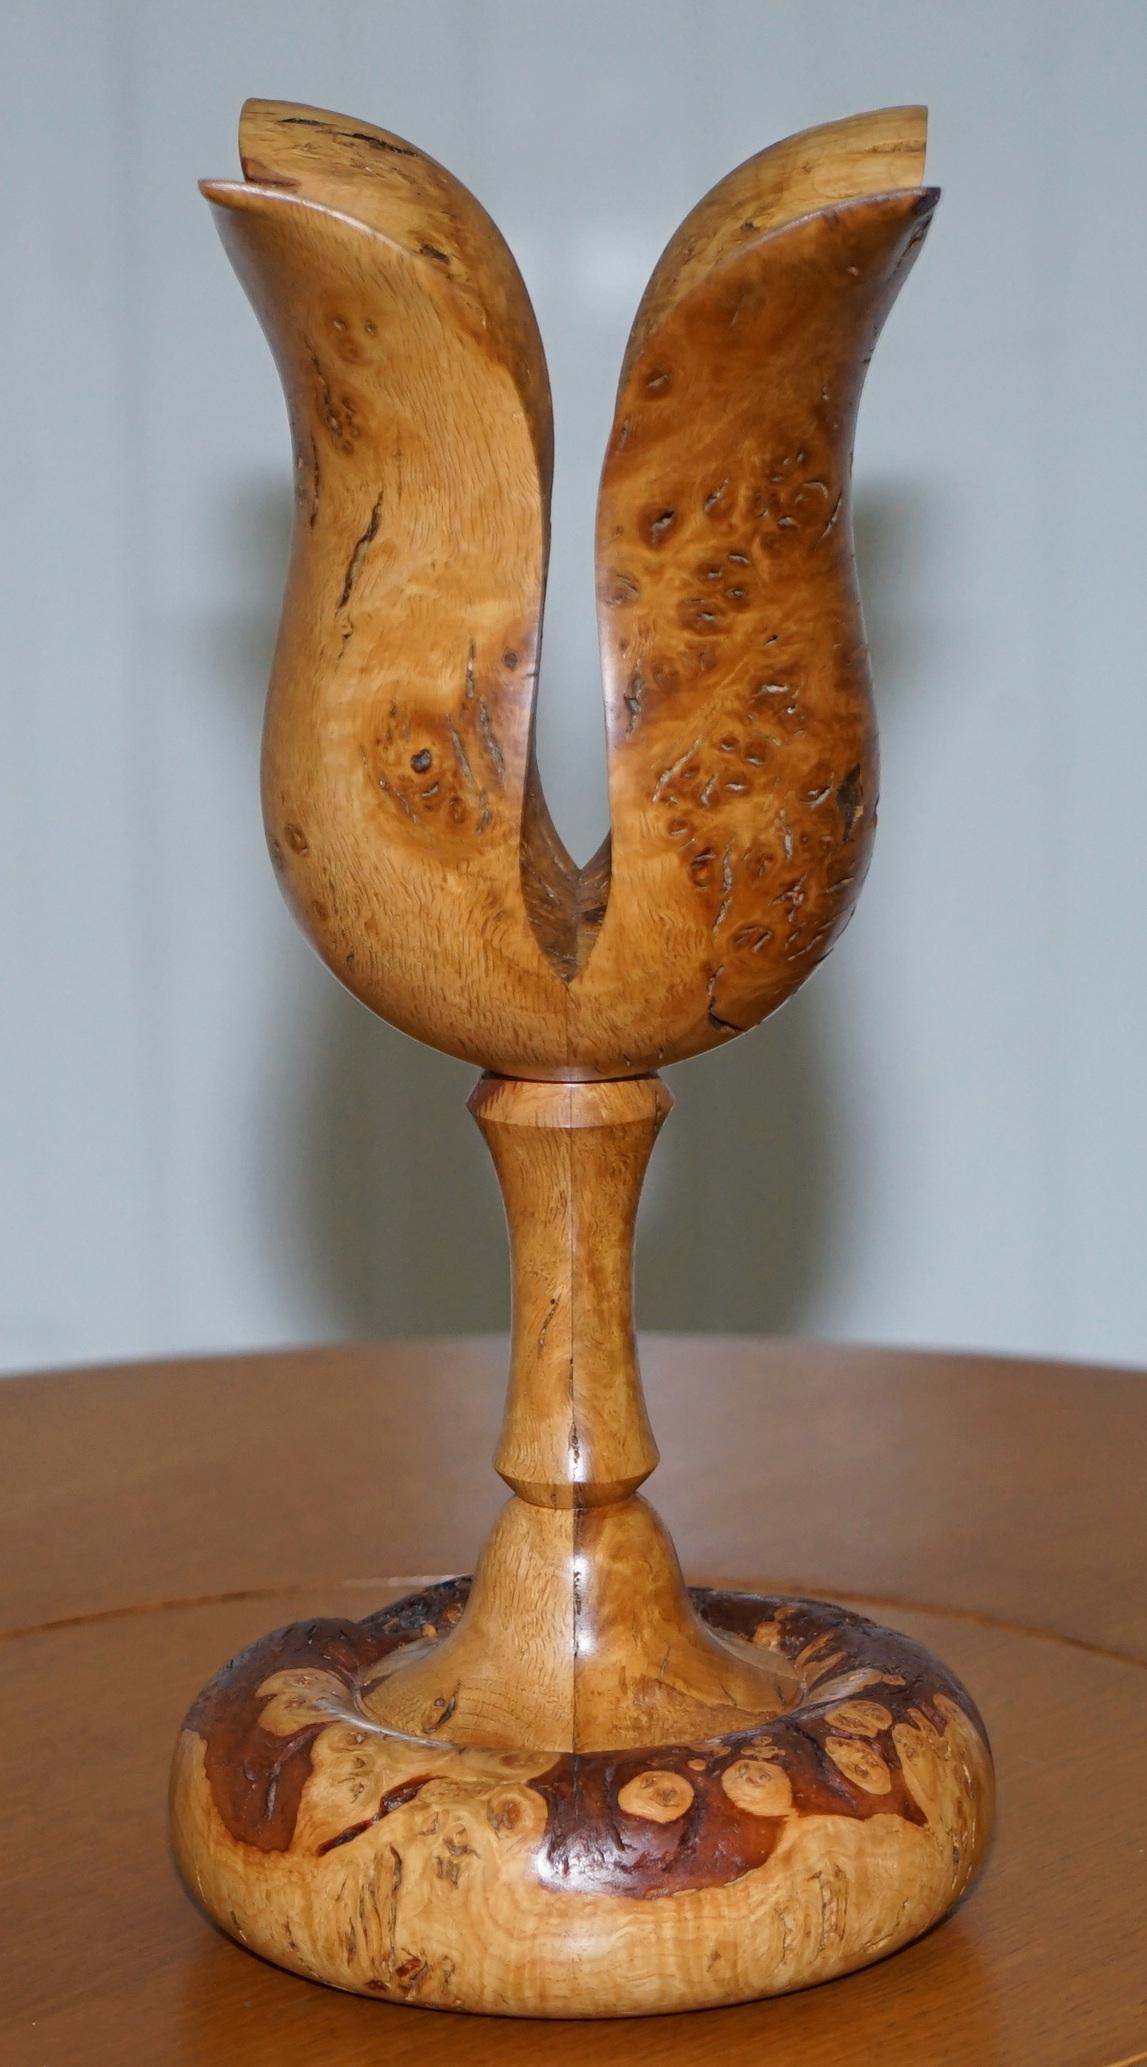 We are delighted to offer for sale this exceptionally rare one of a kind fully signed Margaret Garland 1893-1976 floral sculpture from Burr Walnut

Margaret Garland was born in Oxford and attended the Royal College of Art design school between